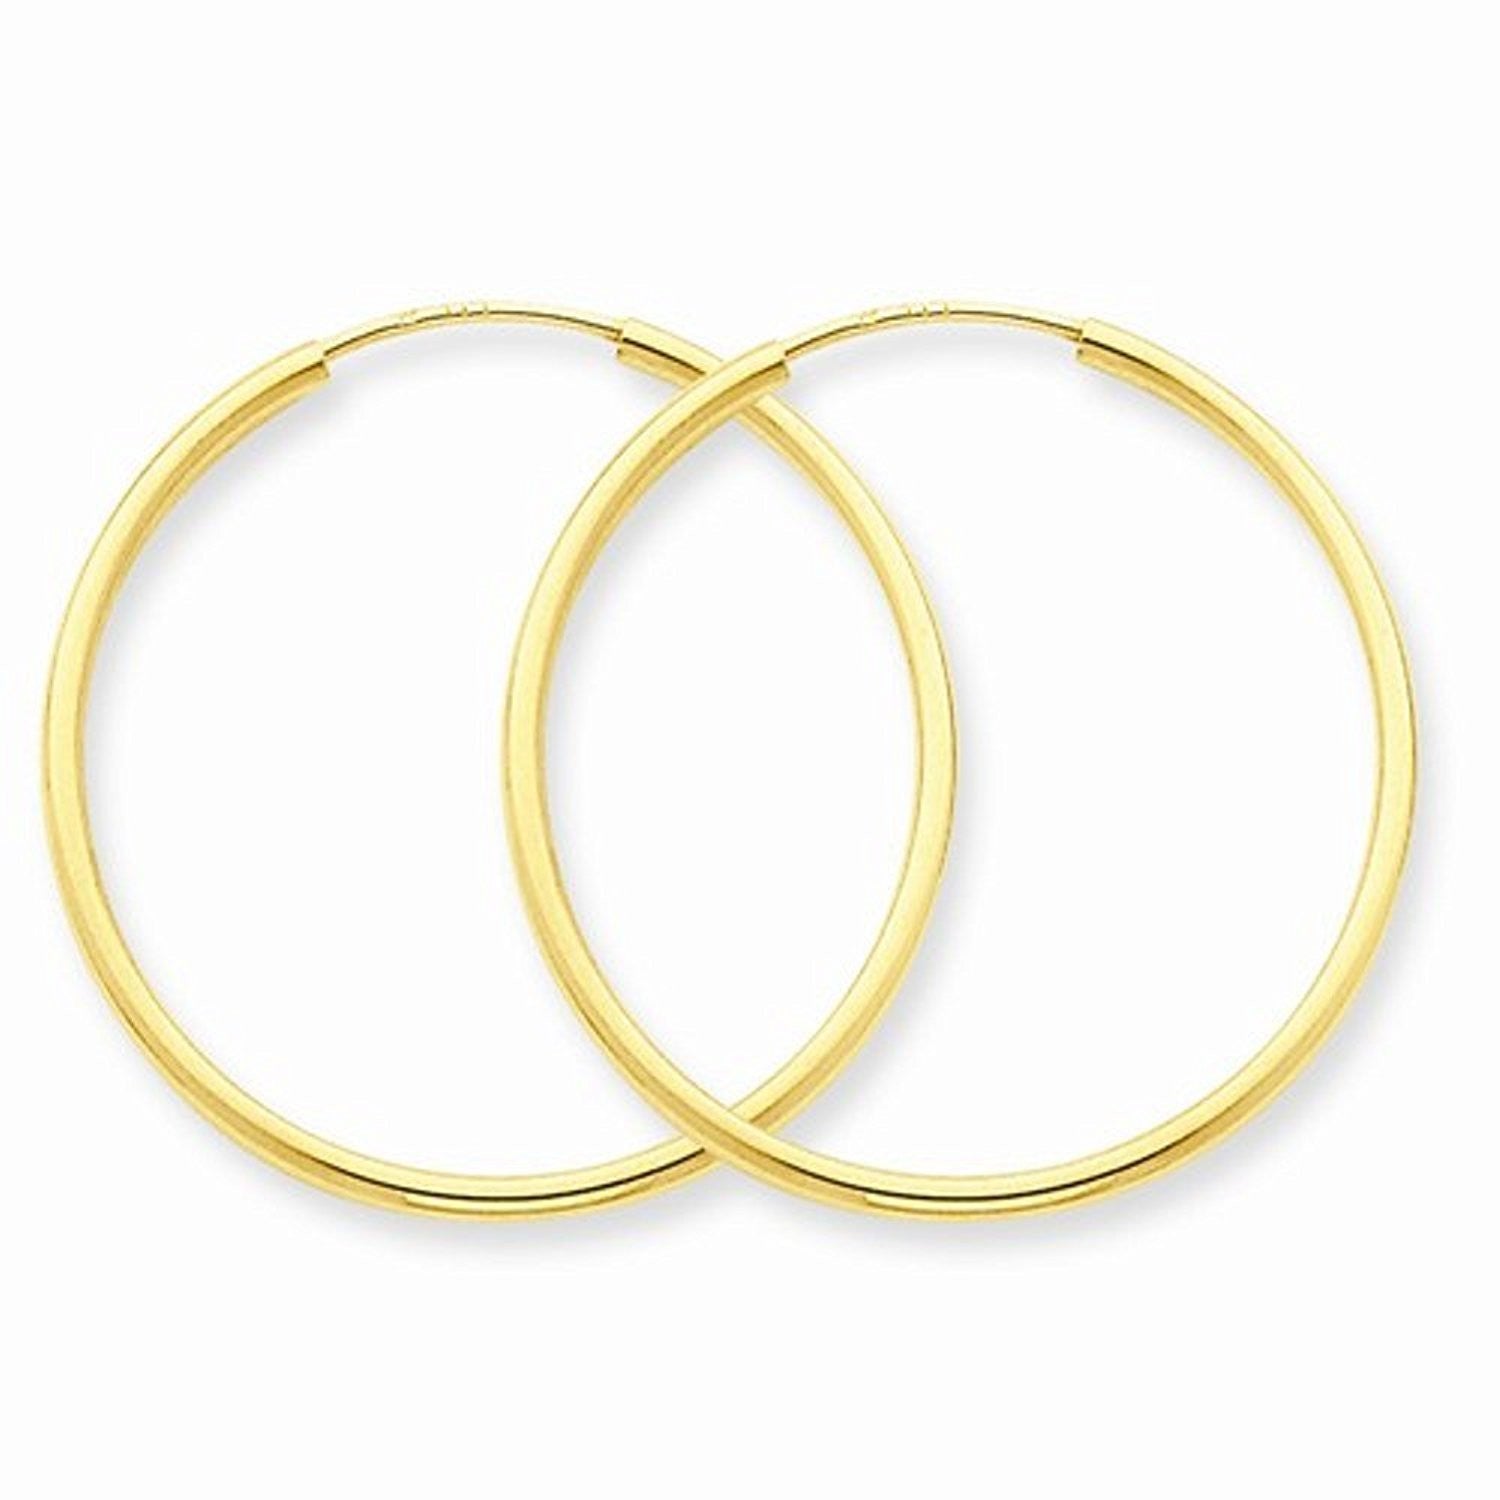 14K Yellow Gold 26mm x 1.5mm Endless Round Hoop Earrings